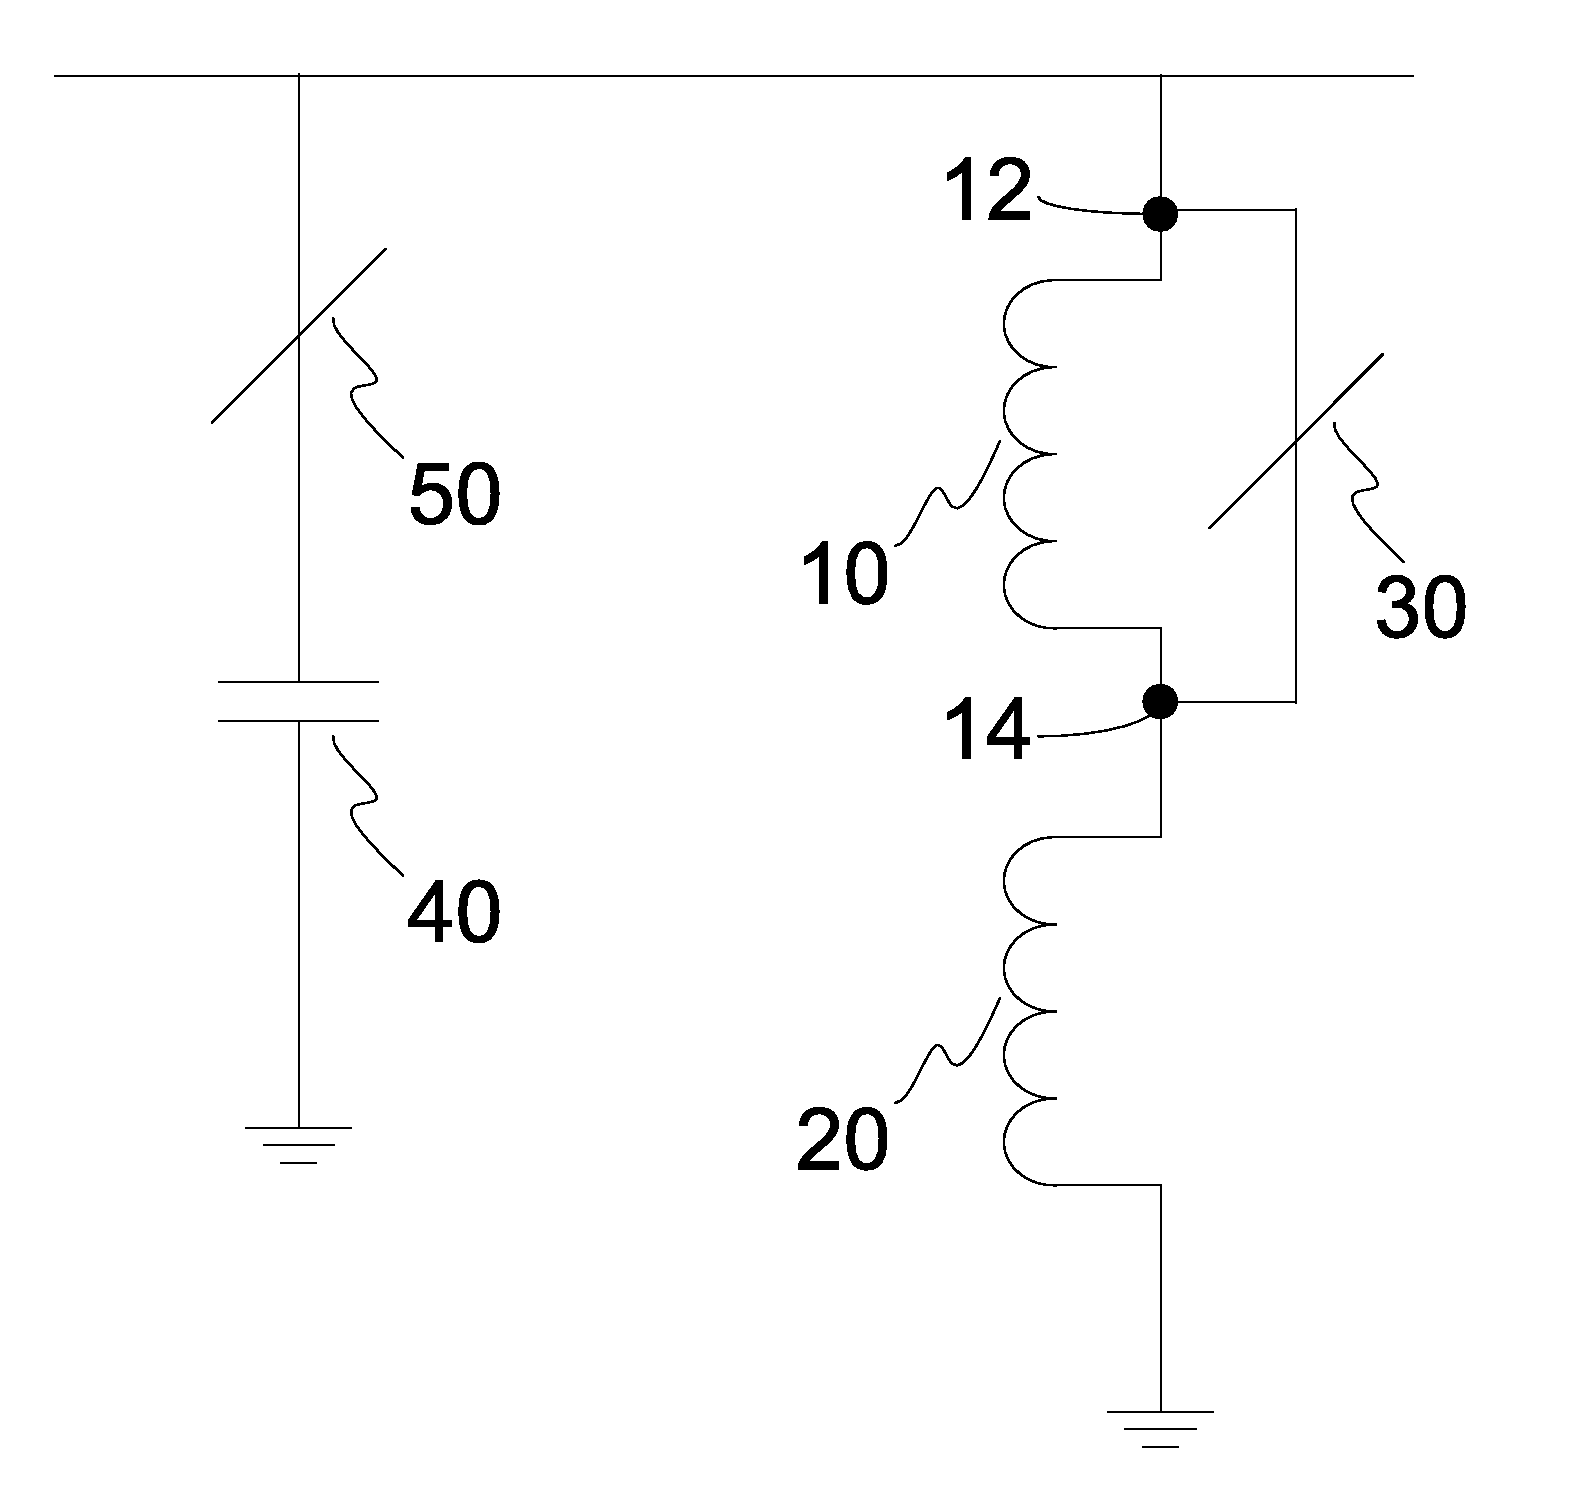 Central frequency adjustment device and adjustable inductor layout using trimmable wire